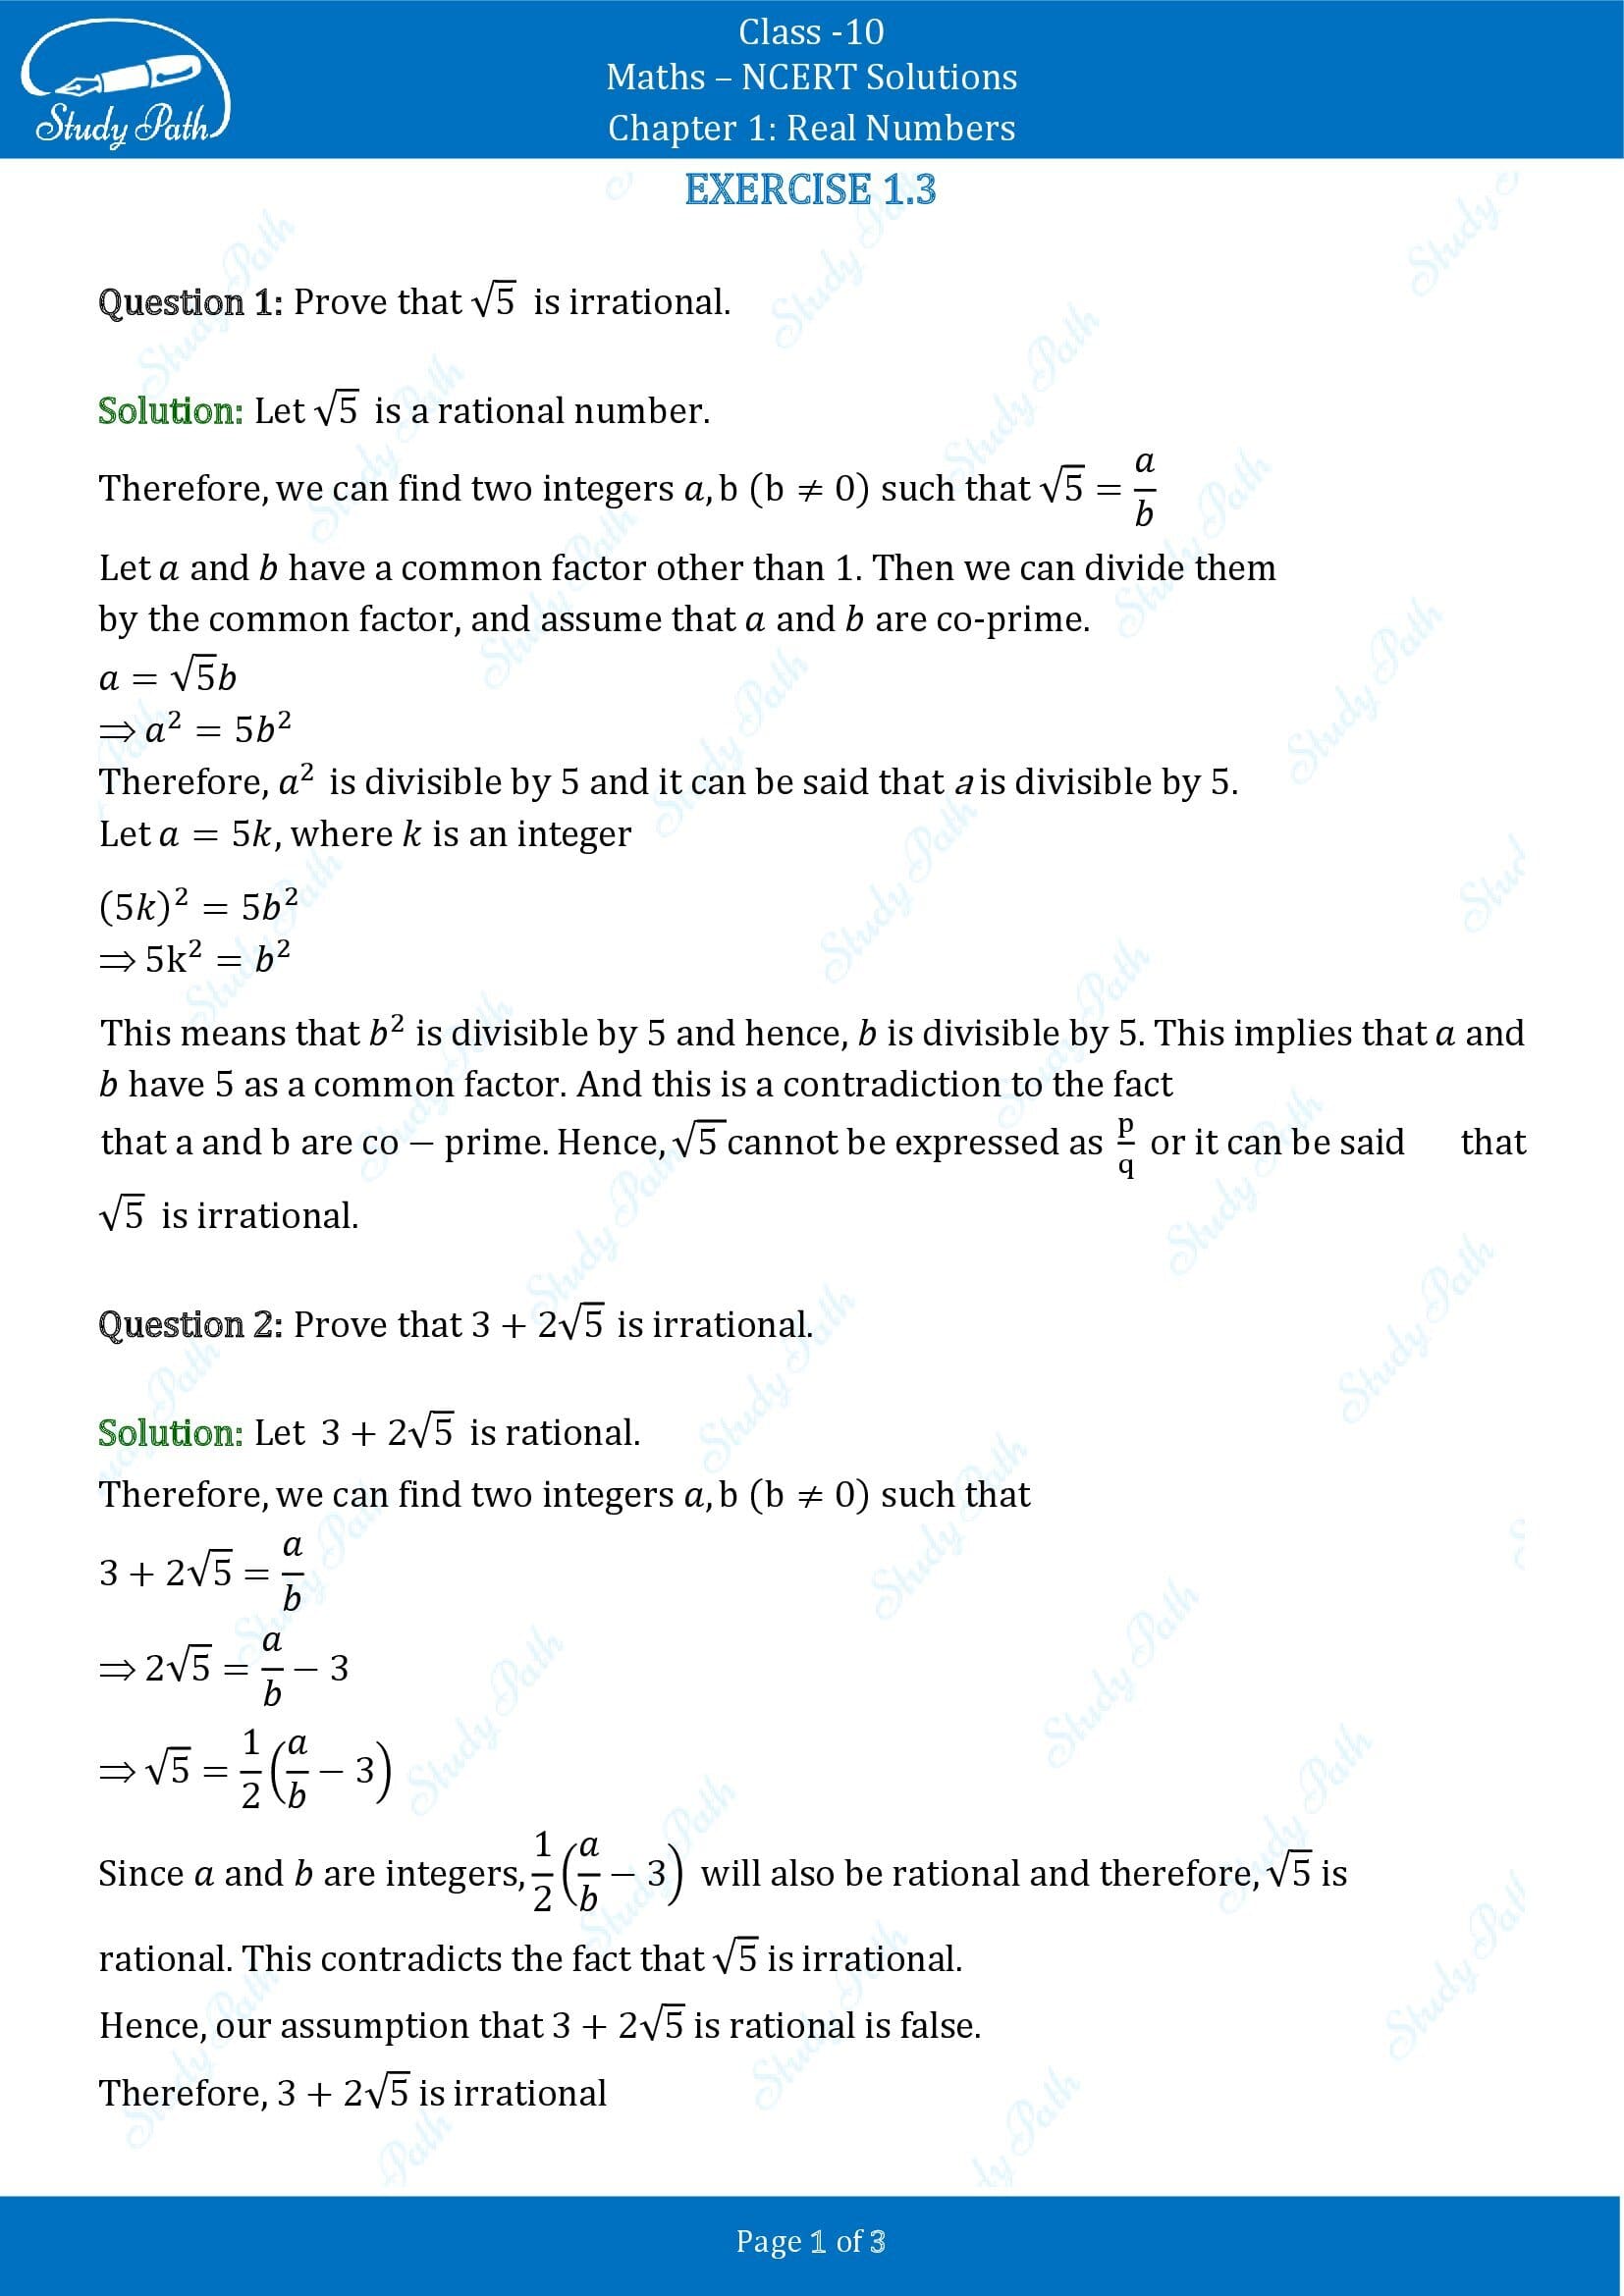 NCERT Solutions for Class 10 Maths Chapter 1 Real Numbers Exercise 1.3 00001